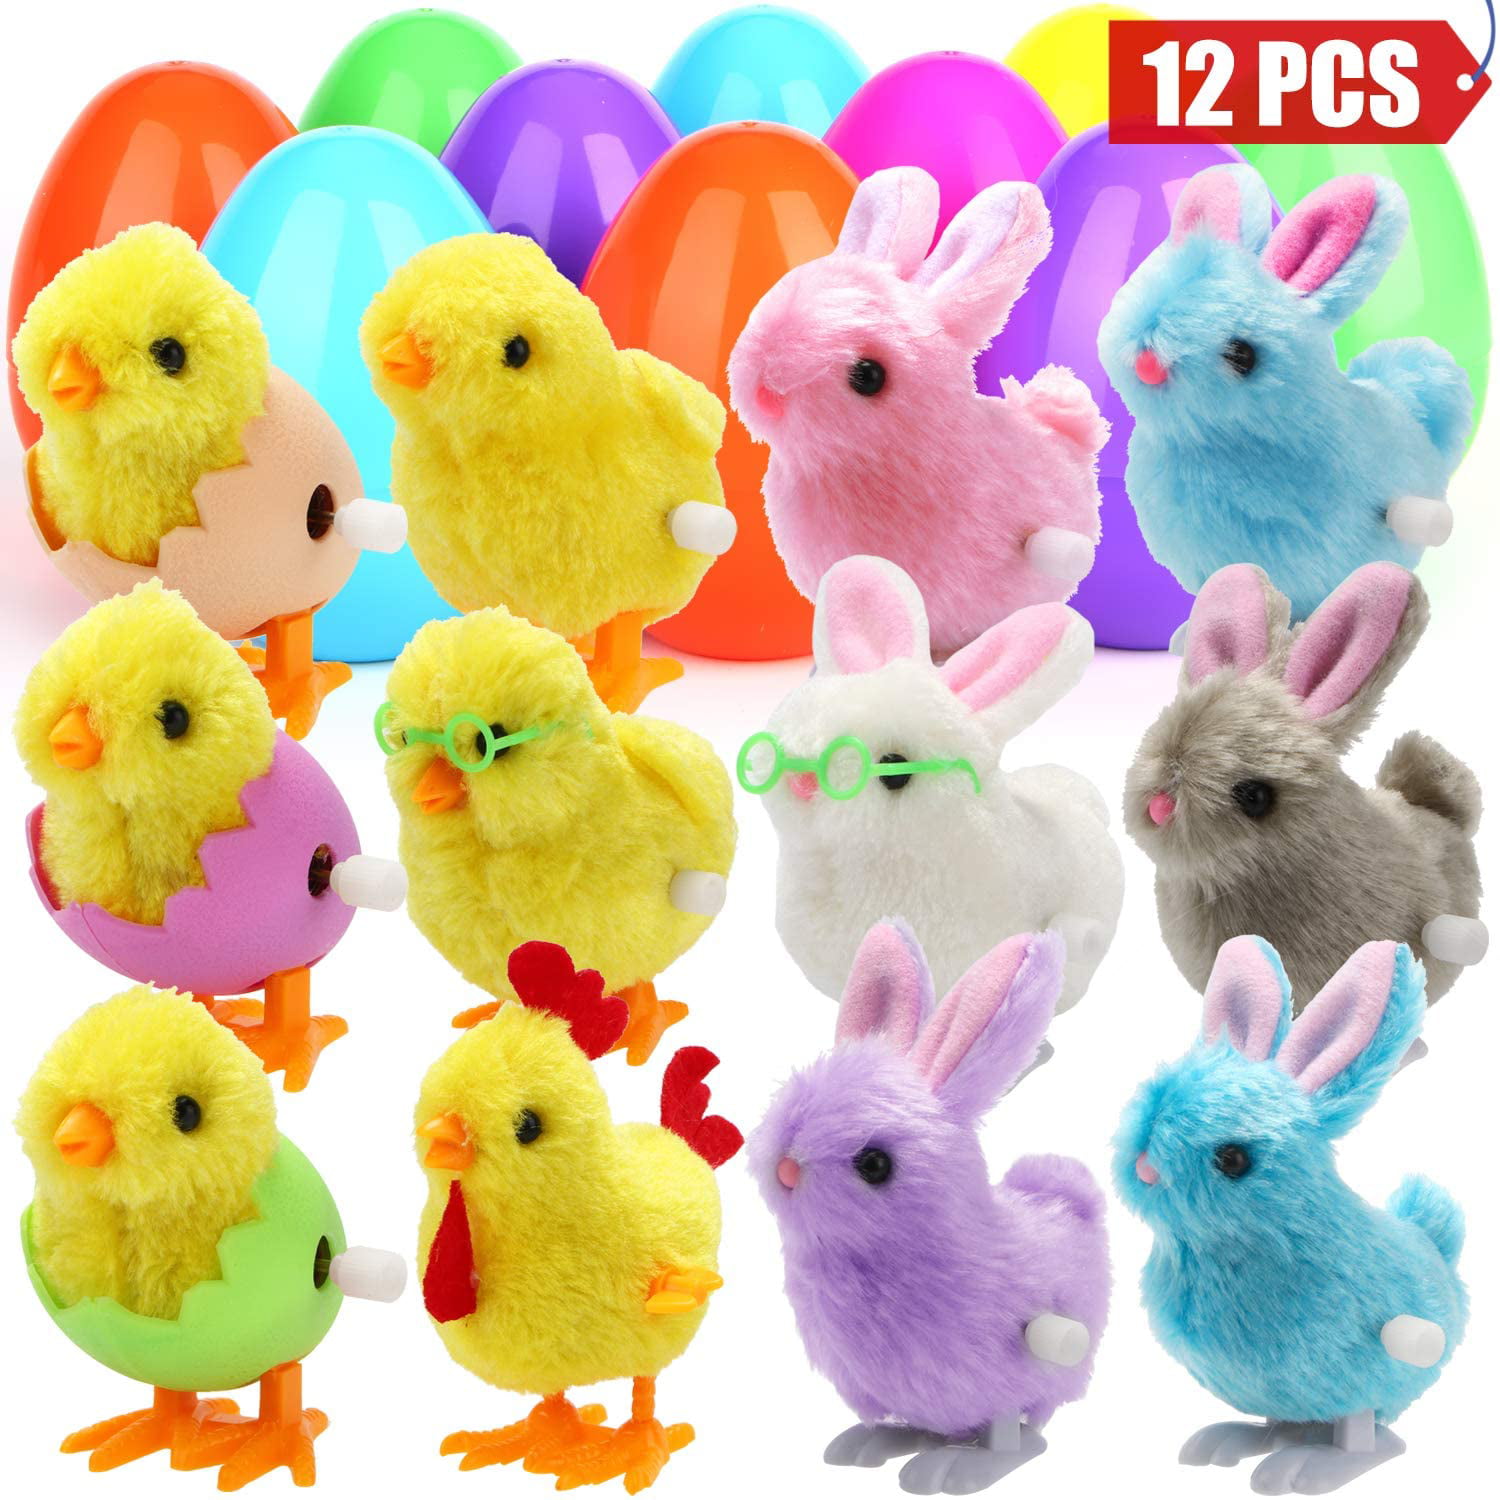 Easter Eggs Filled with Wind Up Animal Toys Easter Eggs Hunt Basket Filler 12 Pieces Assorted Clockwork Toy Set for Easter Theme Party Favor Classroom Prize Supplies